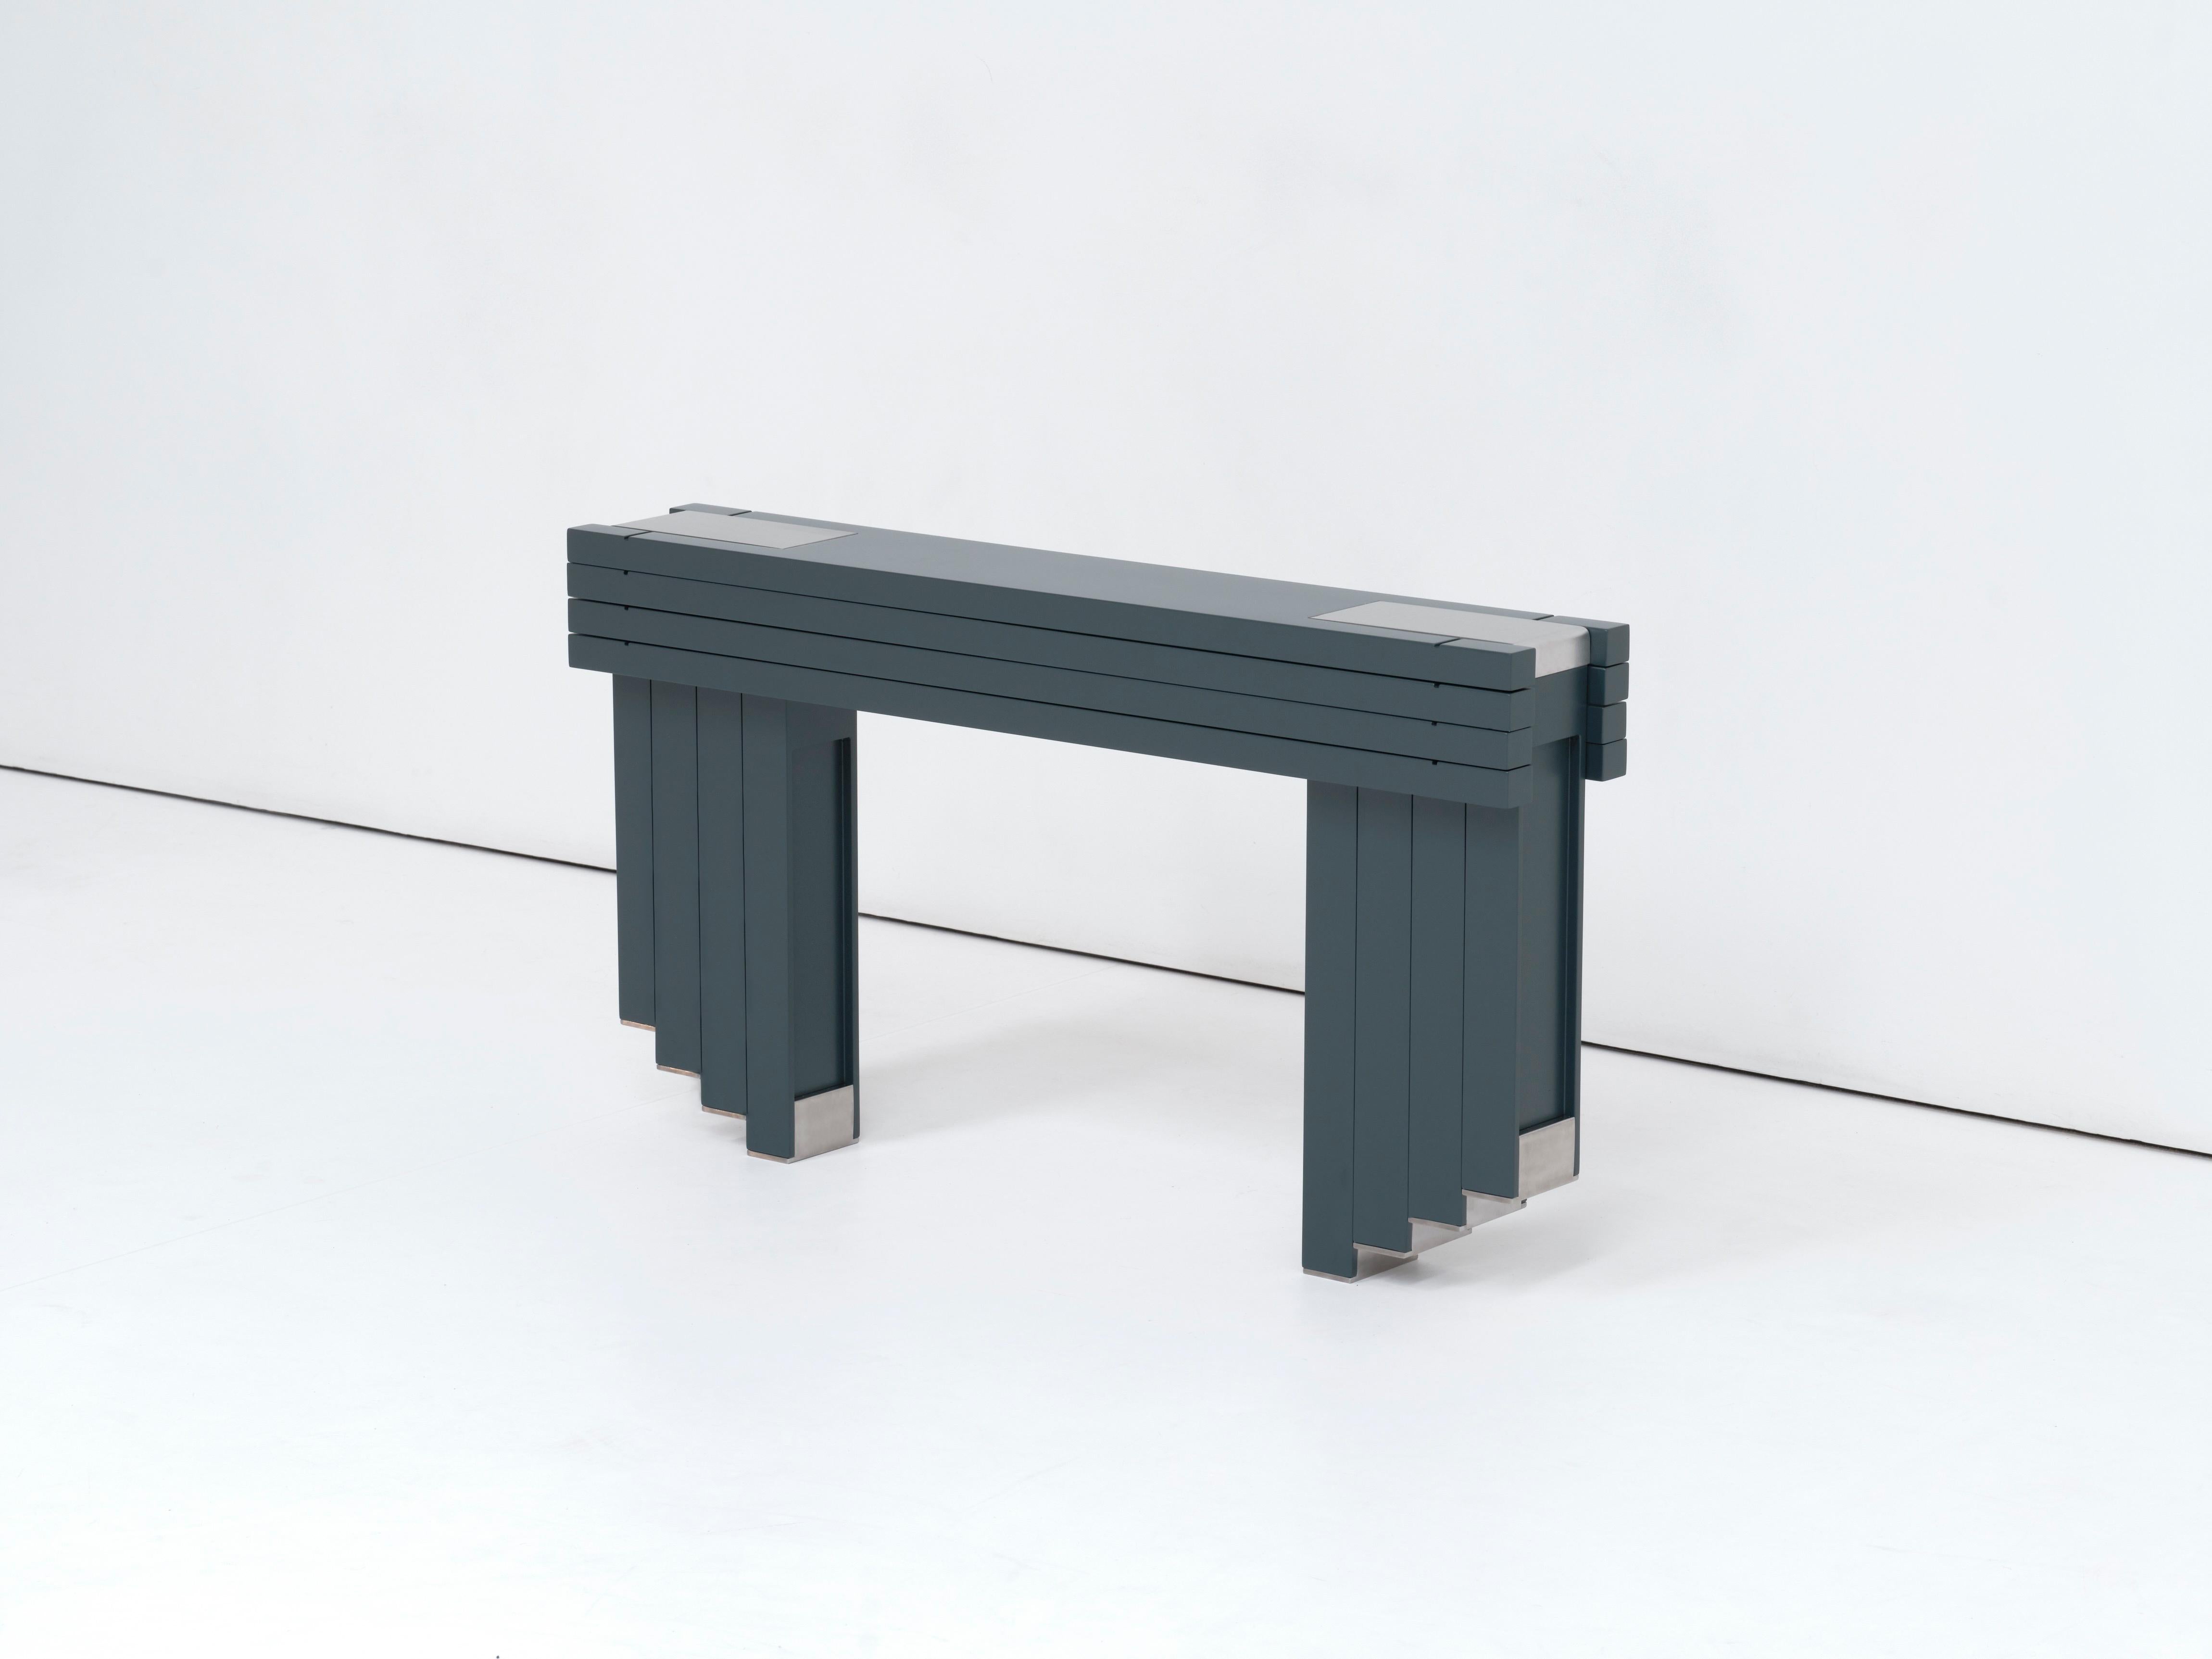 The bench takes its formal character from the traditional bench chair of the Chinese countryside. In a contemporary translation, four benches compose a set with the potential to create different configurations of the object and space. Subtle details